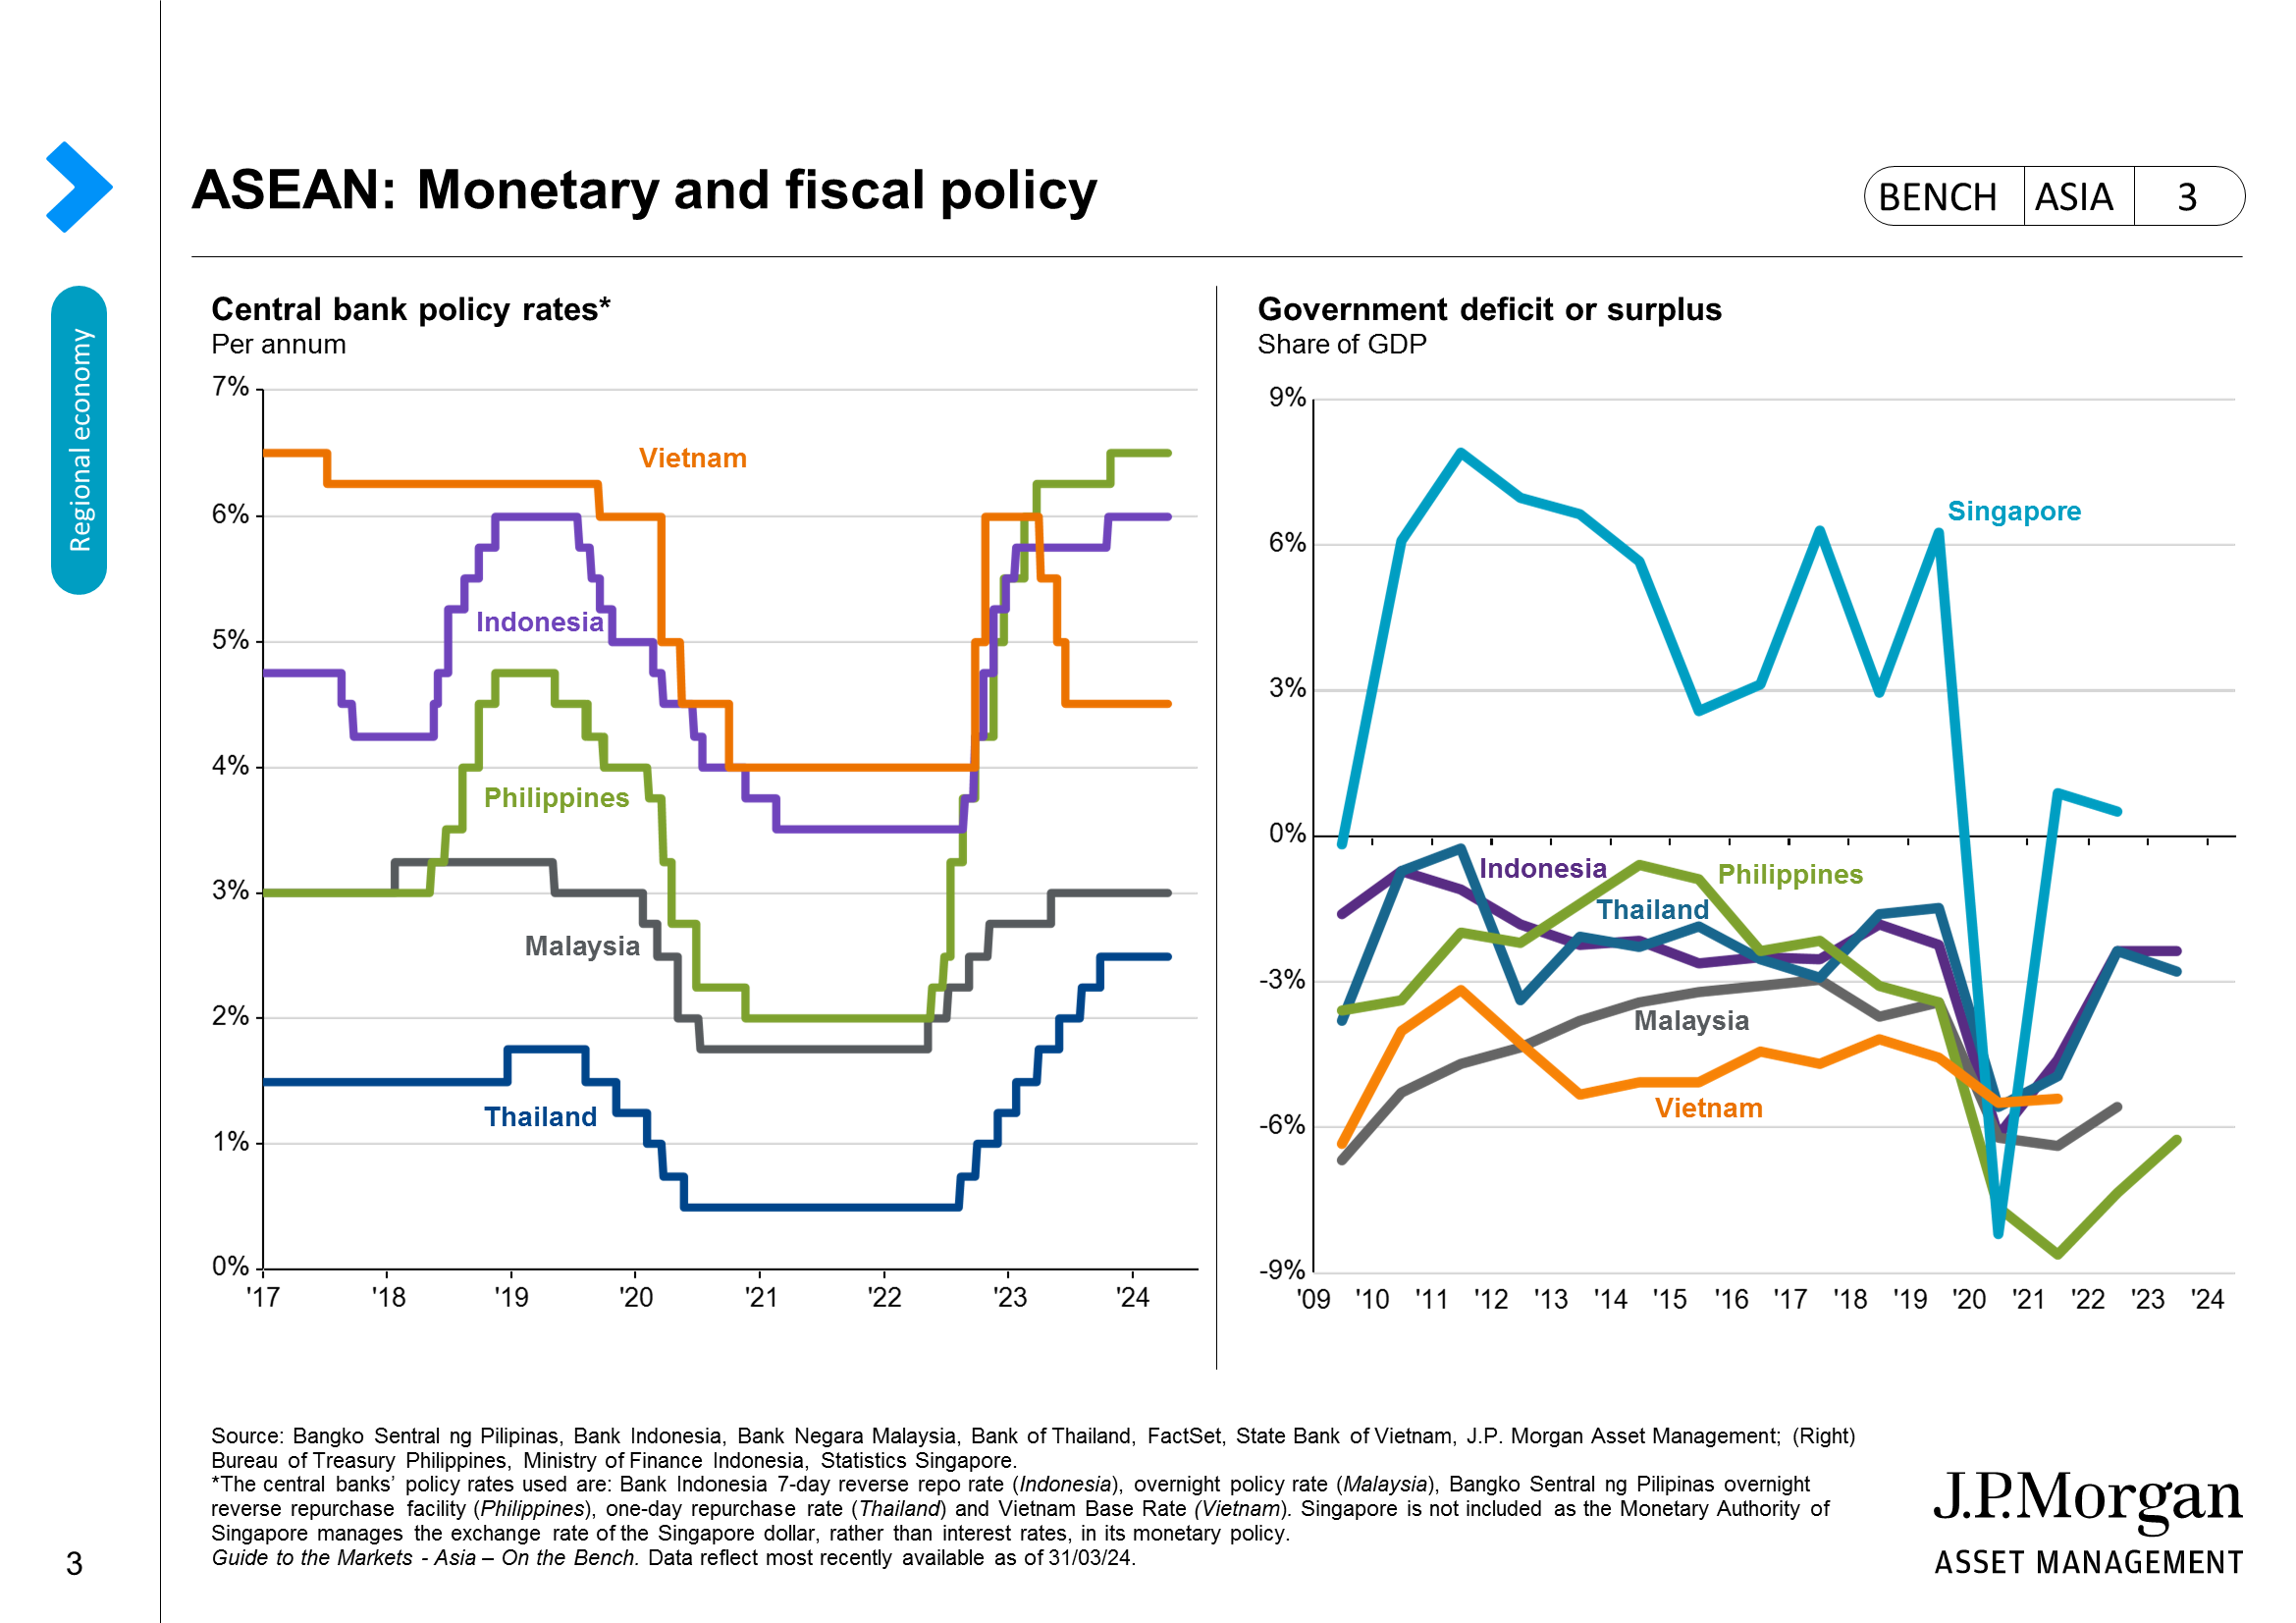 ASEAN: Monetary and fiscal policy